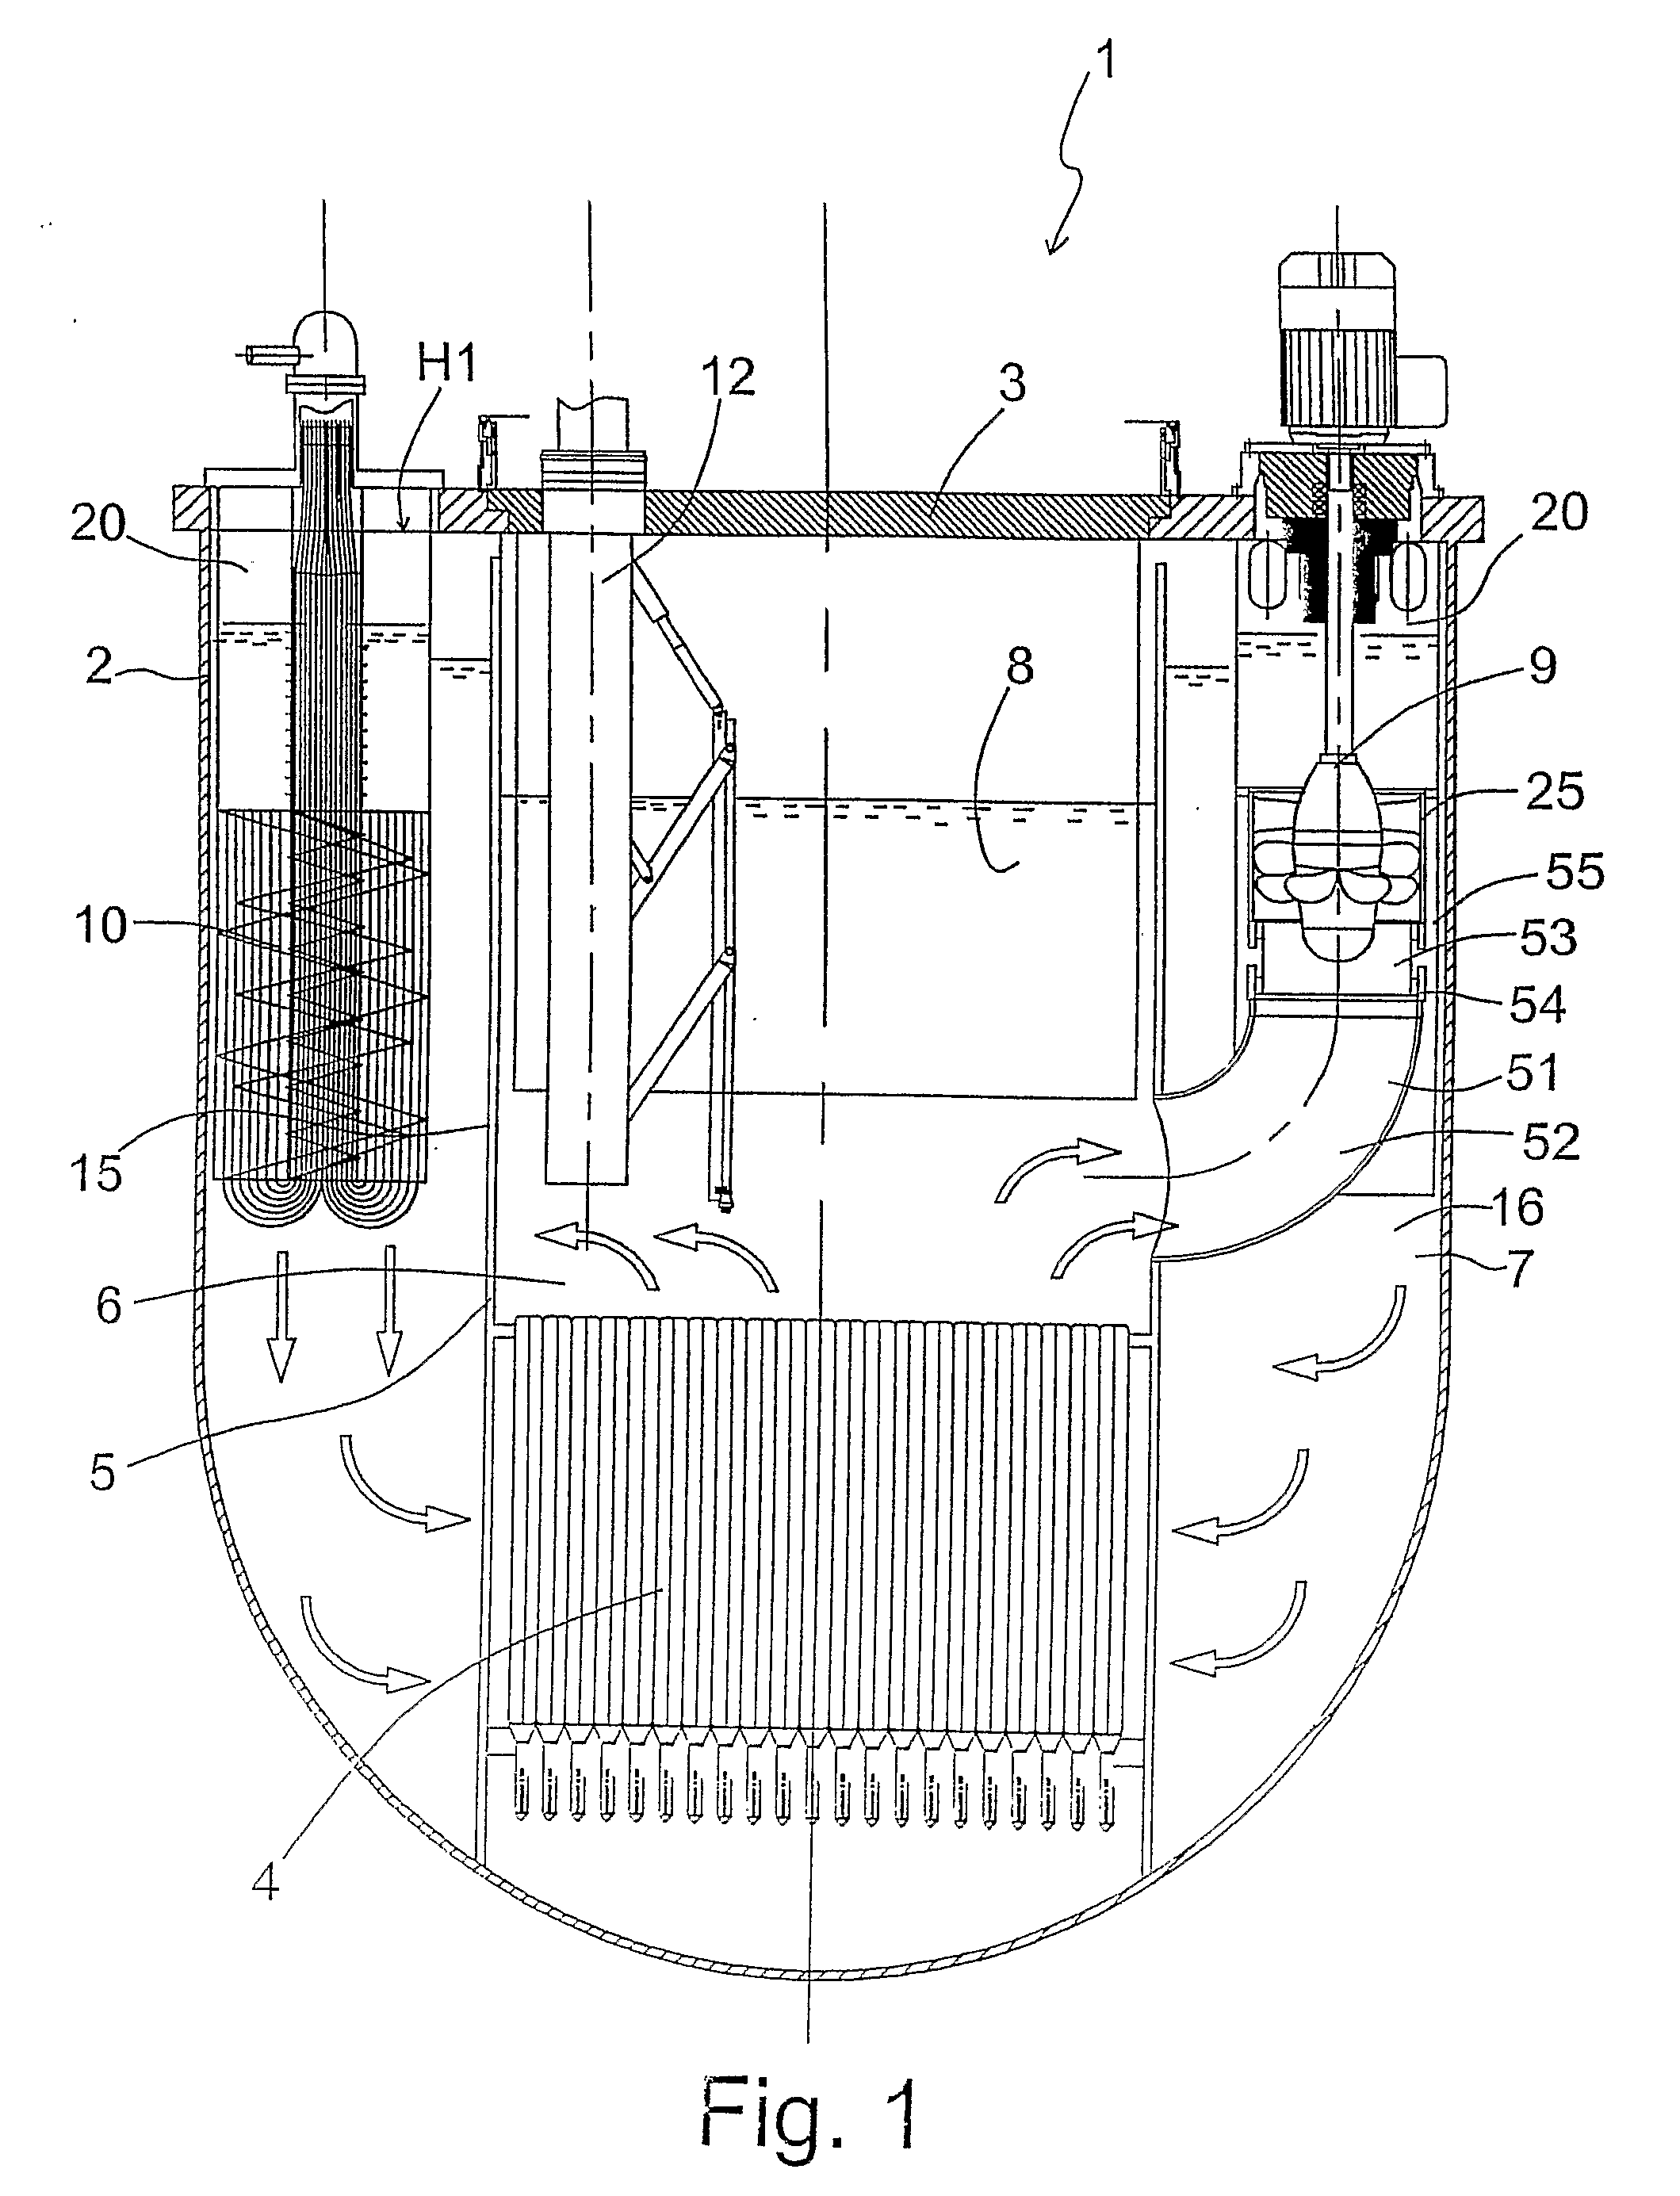 Nuclear Reactor, In Particular a Liquid-Metal-Cooled Nuclear Reactor